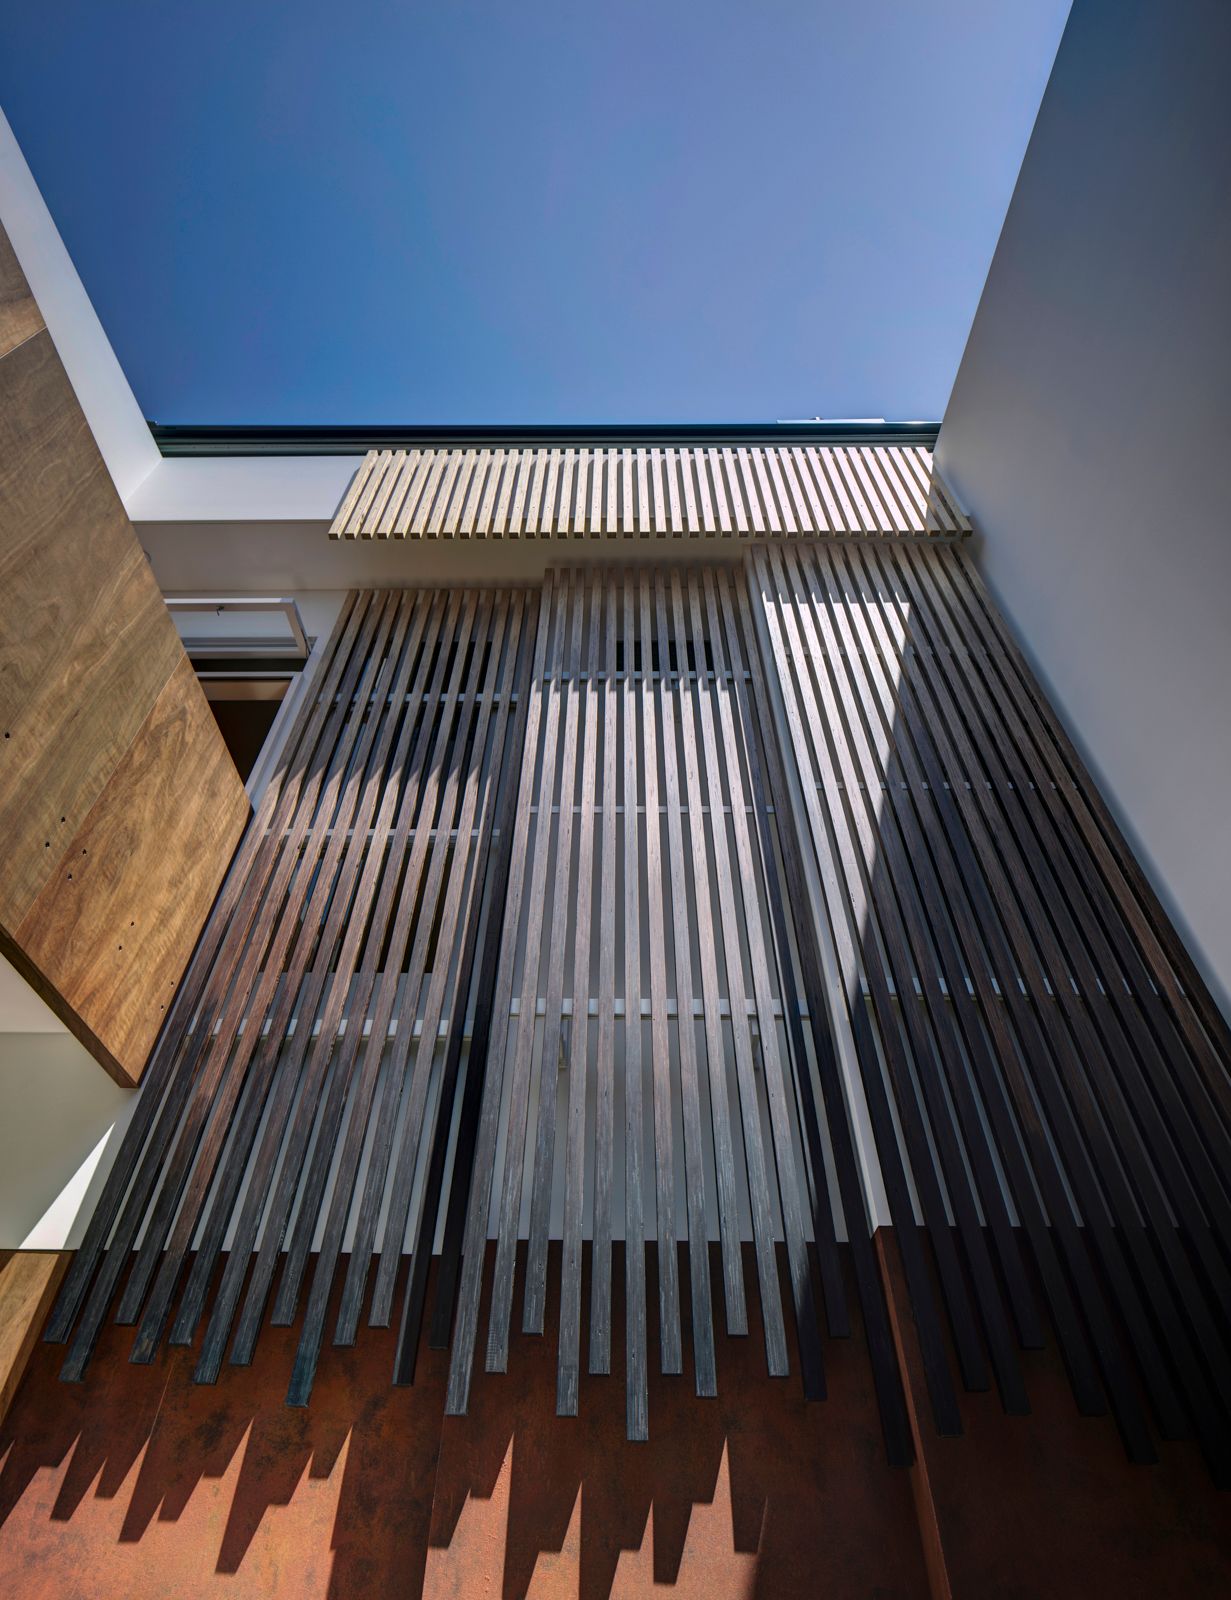 Sky House by Marra+Yeh Architects with timber screen feature in void space